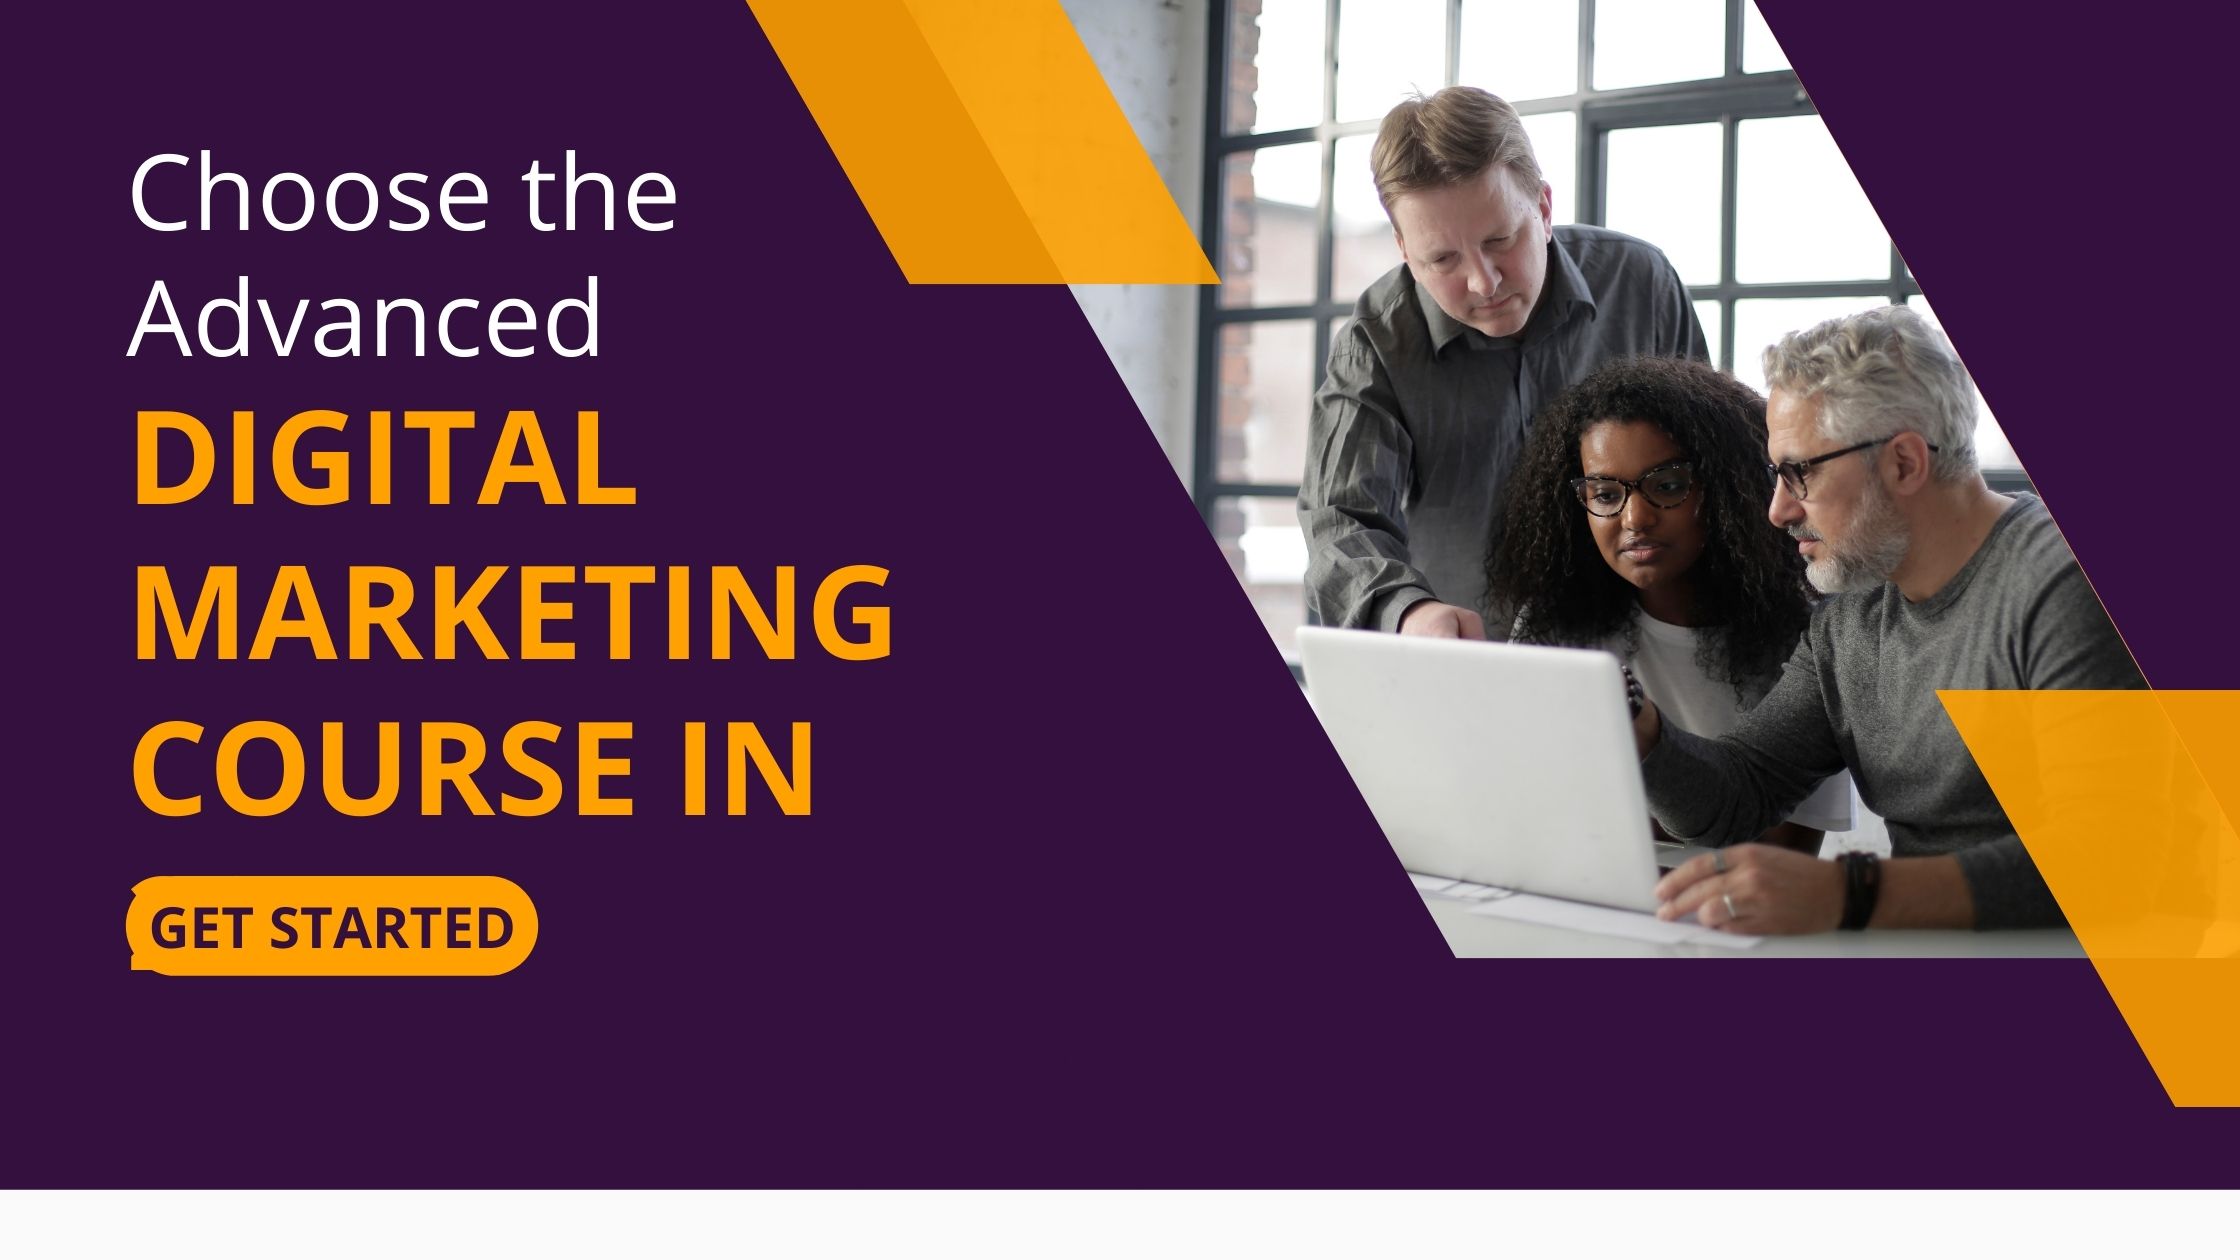 Choose the Advanced Digital Marketing Course in 2022